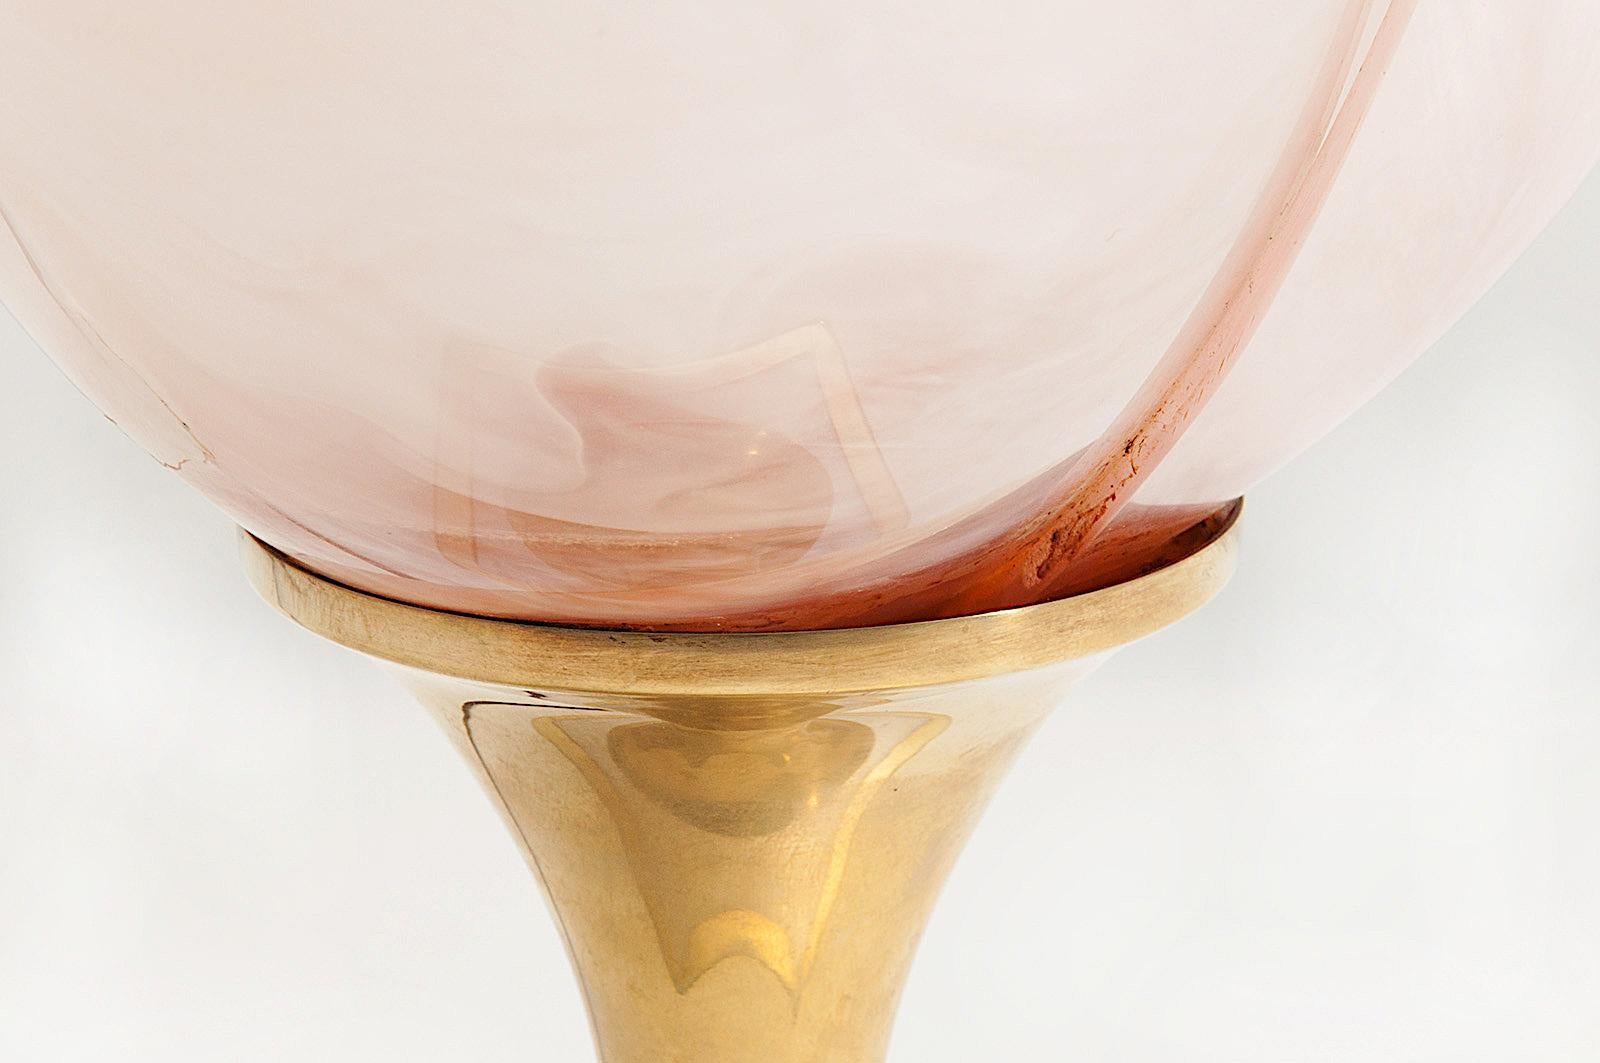 Organic Modern Flower Table Lamp, by Rougier, 6 Petals Model, Pink Color, 1970 France, in Resin